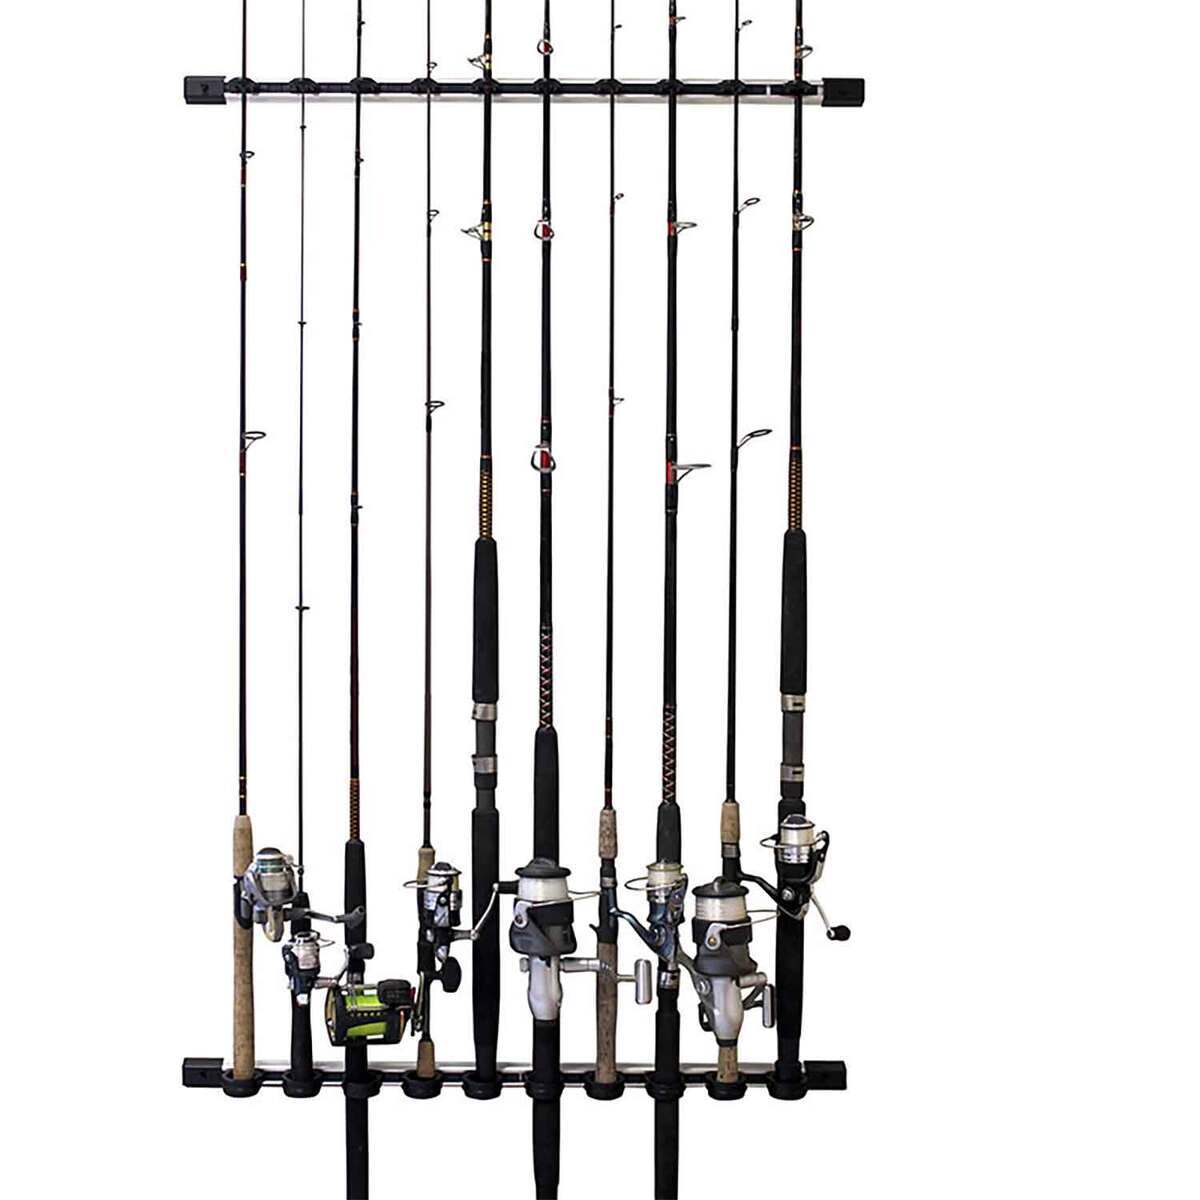 Catch Cover Wall or Ceiling Mount Rod Rack Holder